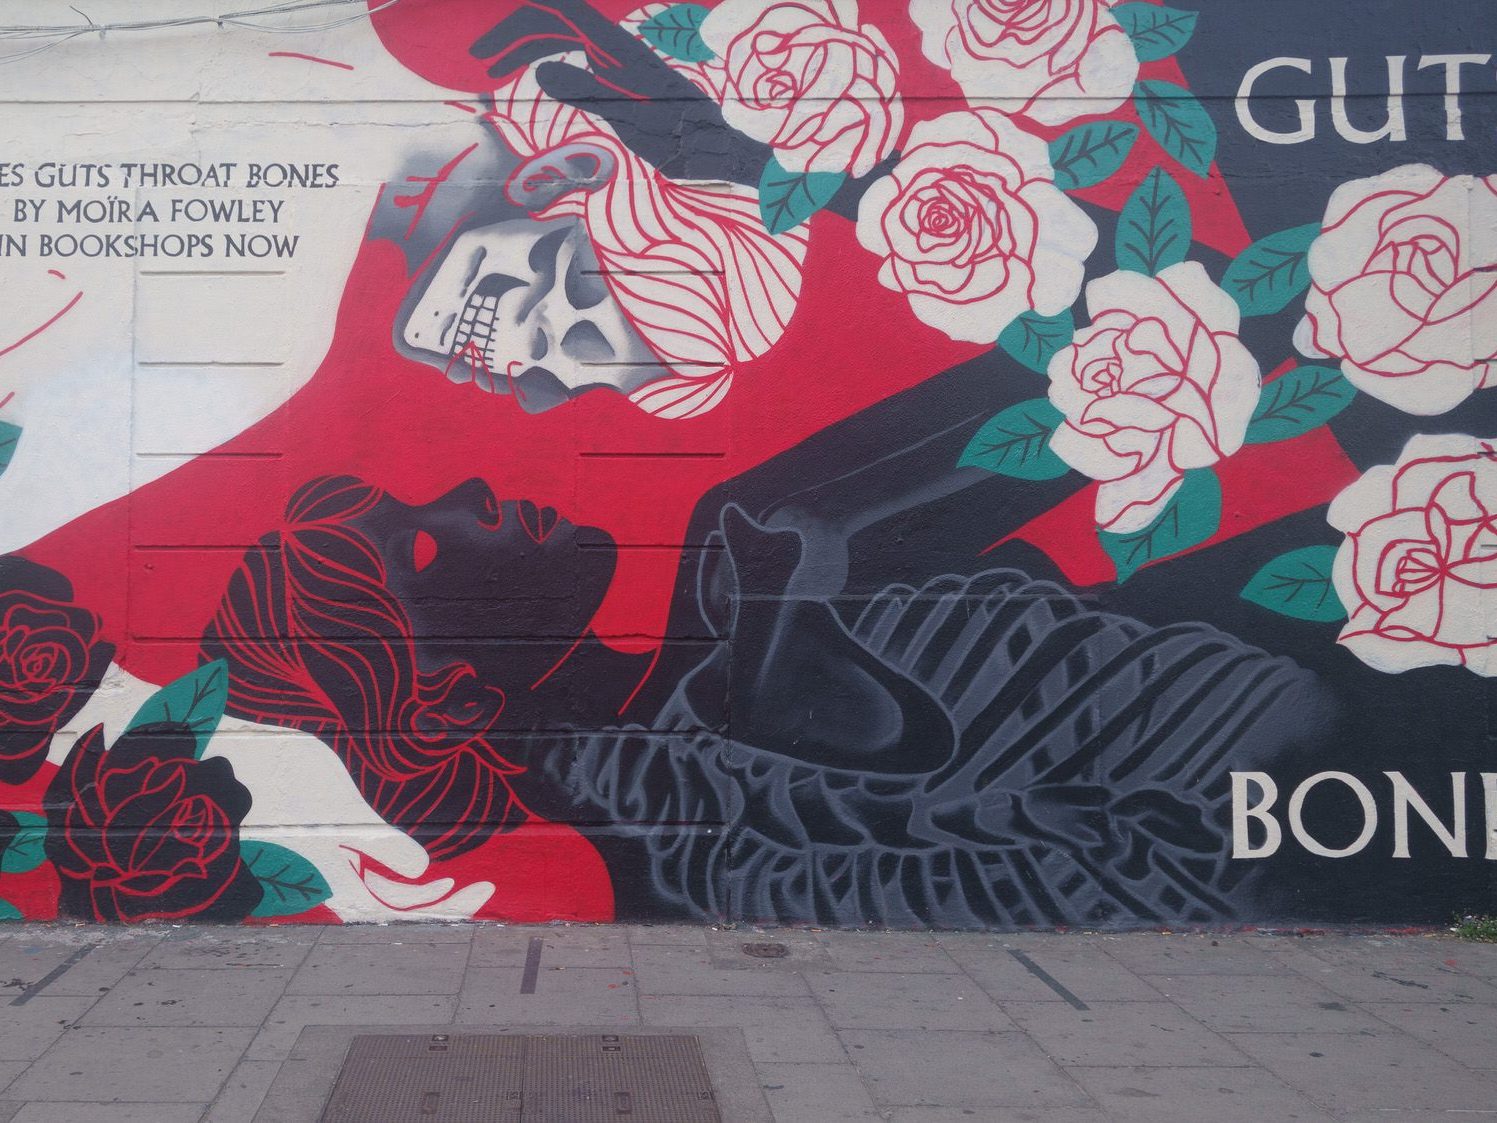 THIS MURAL IS PROMOTING EYES GUTS THROAT BONES A BOOK BY MOIRA FOWLEY [CHANCERY STREET BESIDE FEGAN'S 1924 CAFE] 001